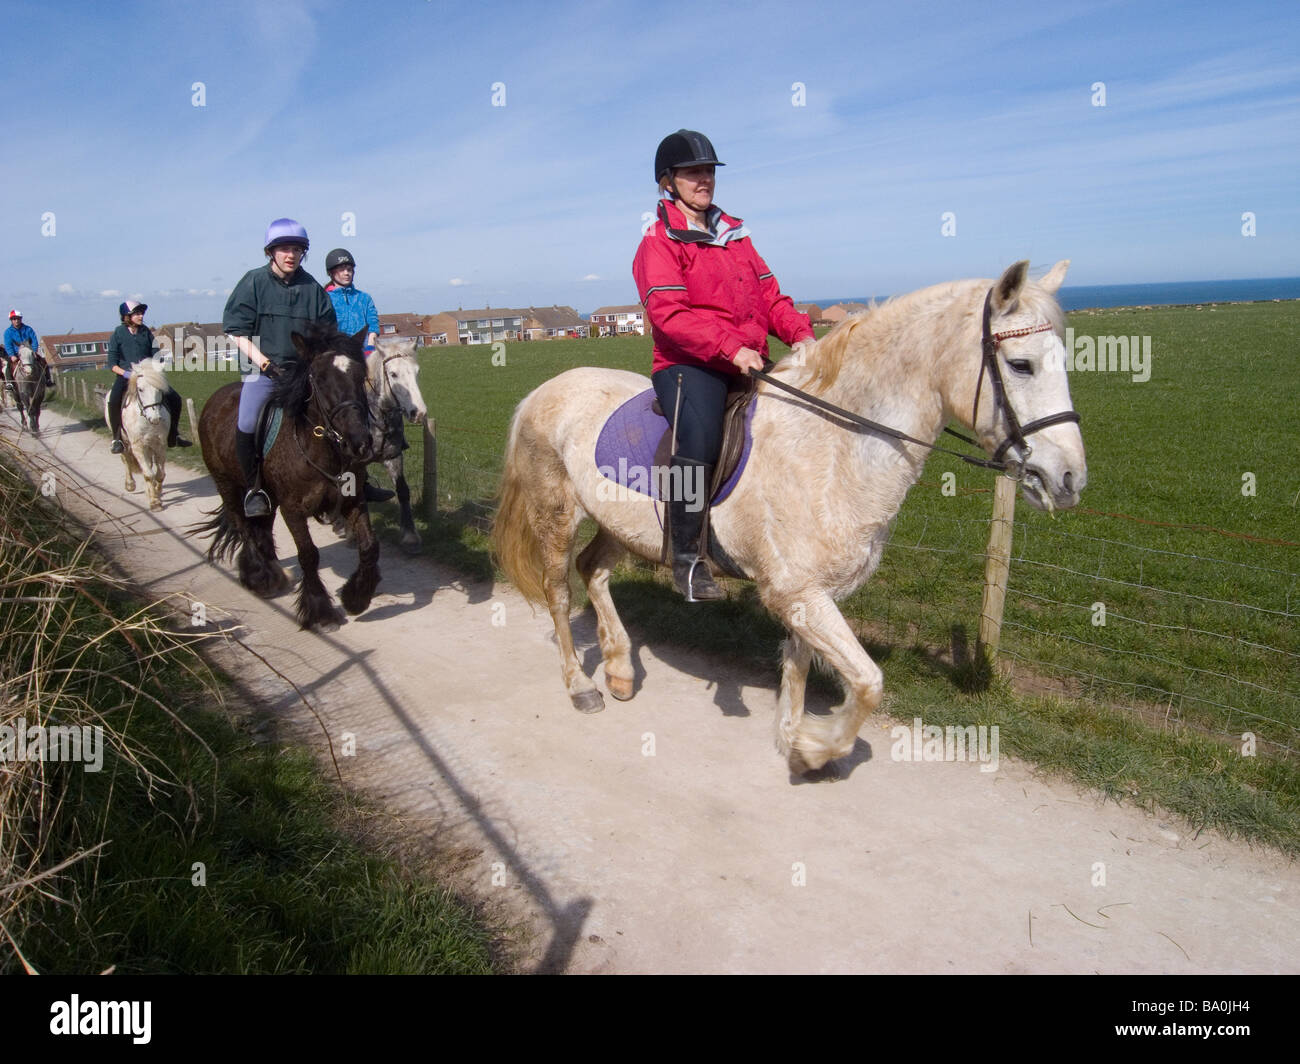 Horse riders from a local riding school on a bridleway at Saltburn Cleveland UK Stock Photo